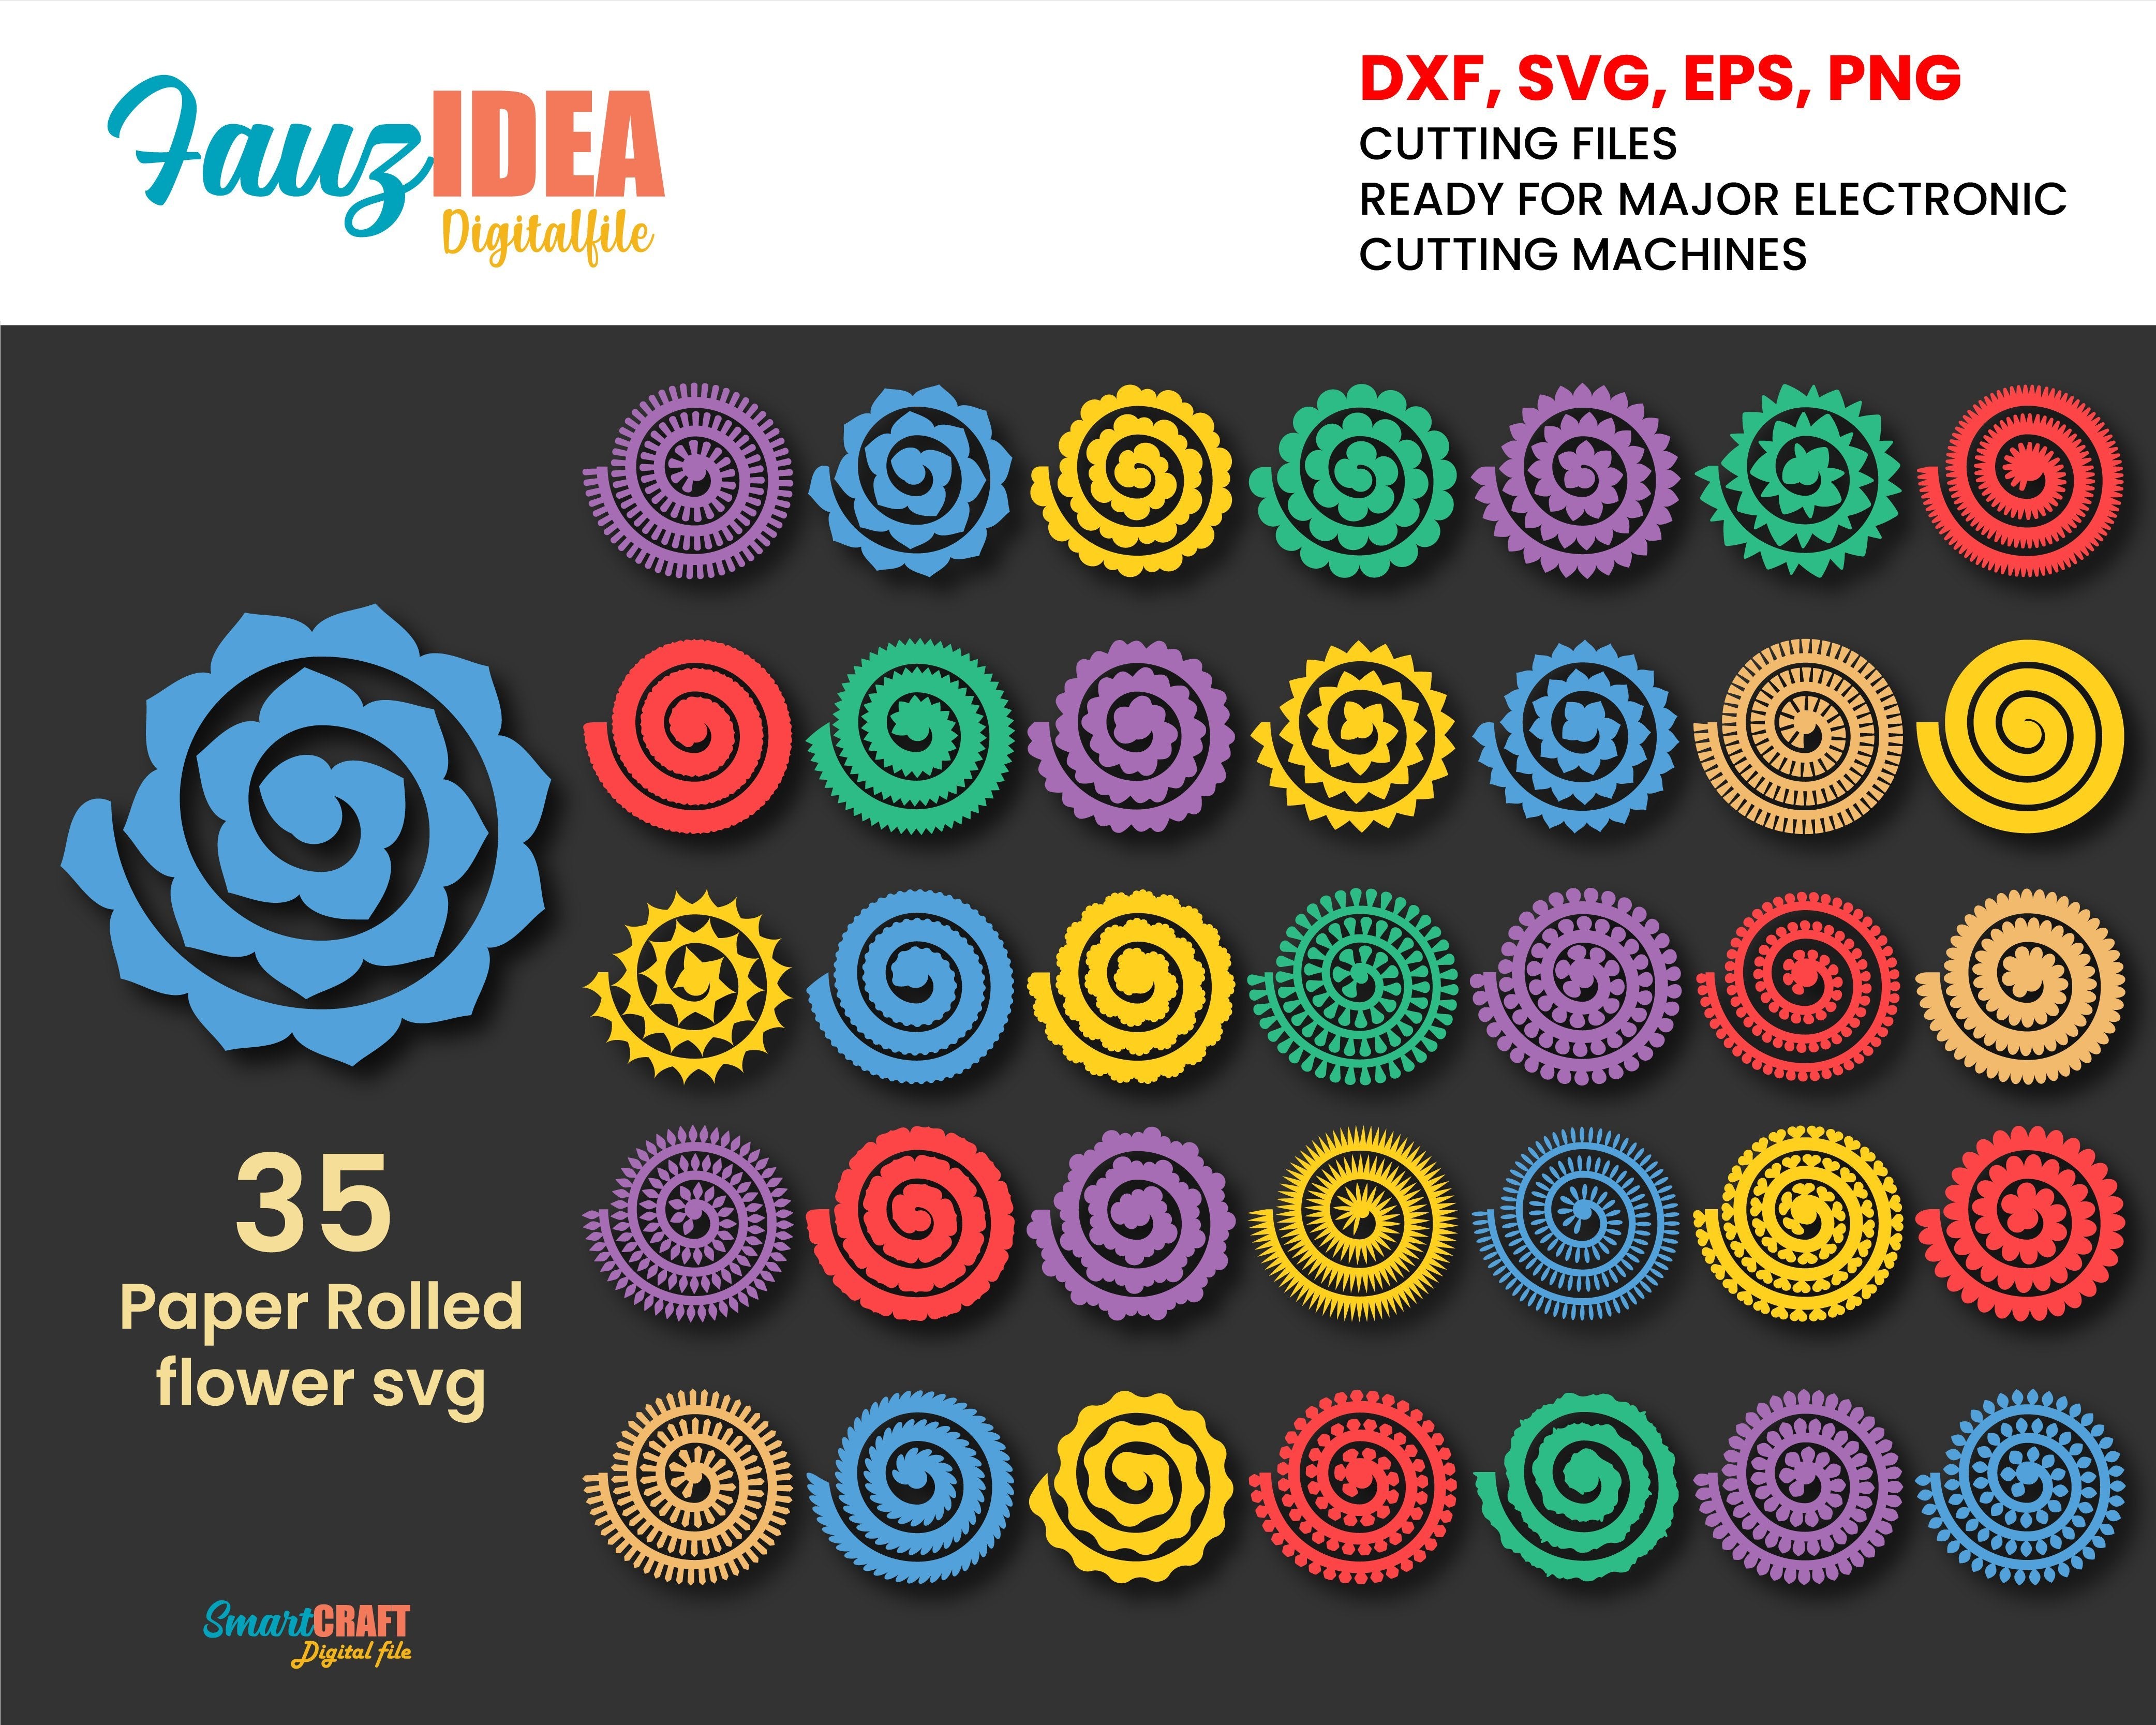 Download Rolled Flower Svg Flowers Template Rolled Paper Flowers Svg Flowers Svg Rolled Flower Cut File 3d Rose Svg Rolled Paper Flower Origami So Fontsy